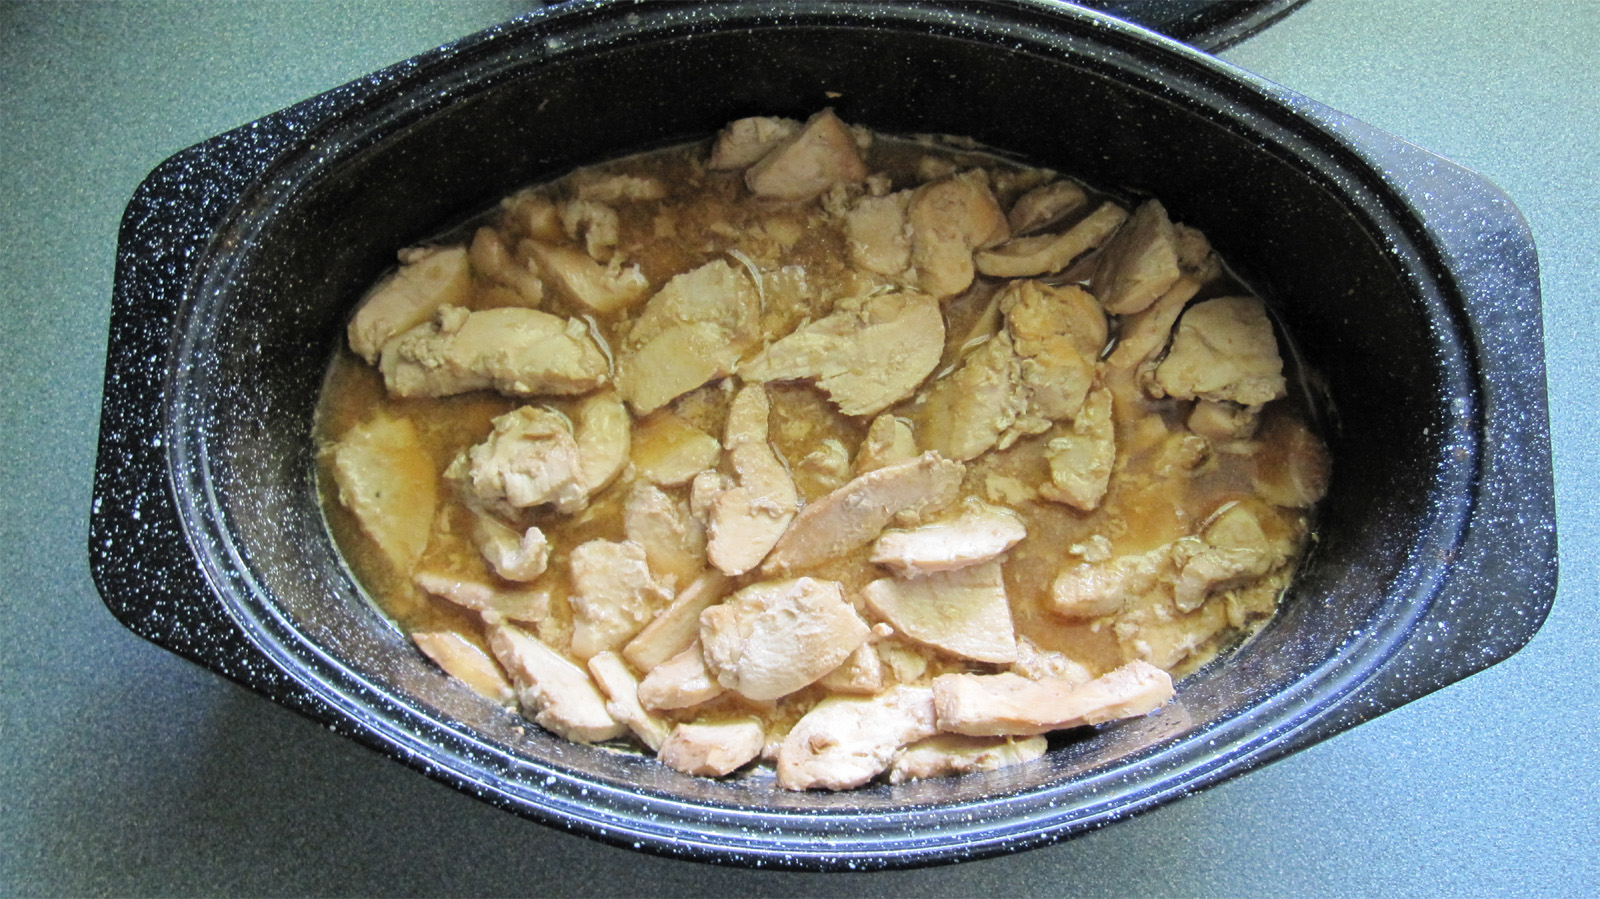 cooked chicken with brown sauce in black pot